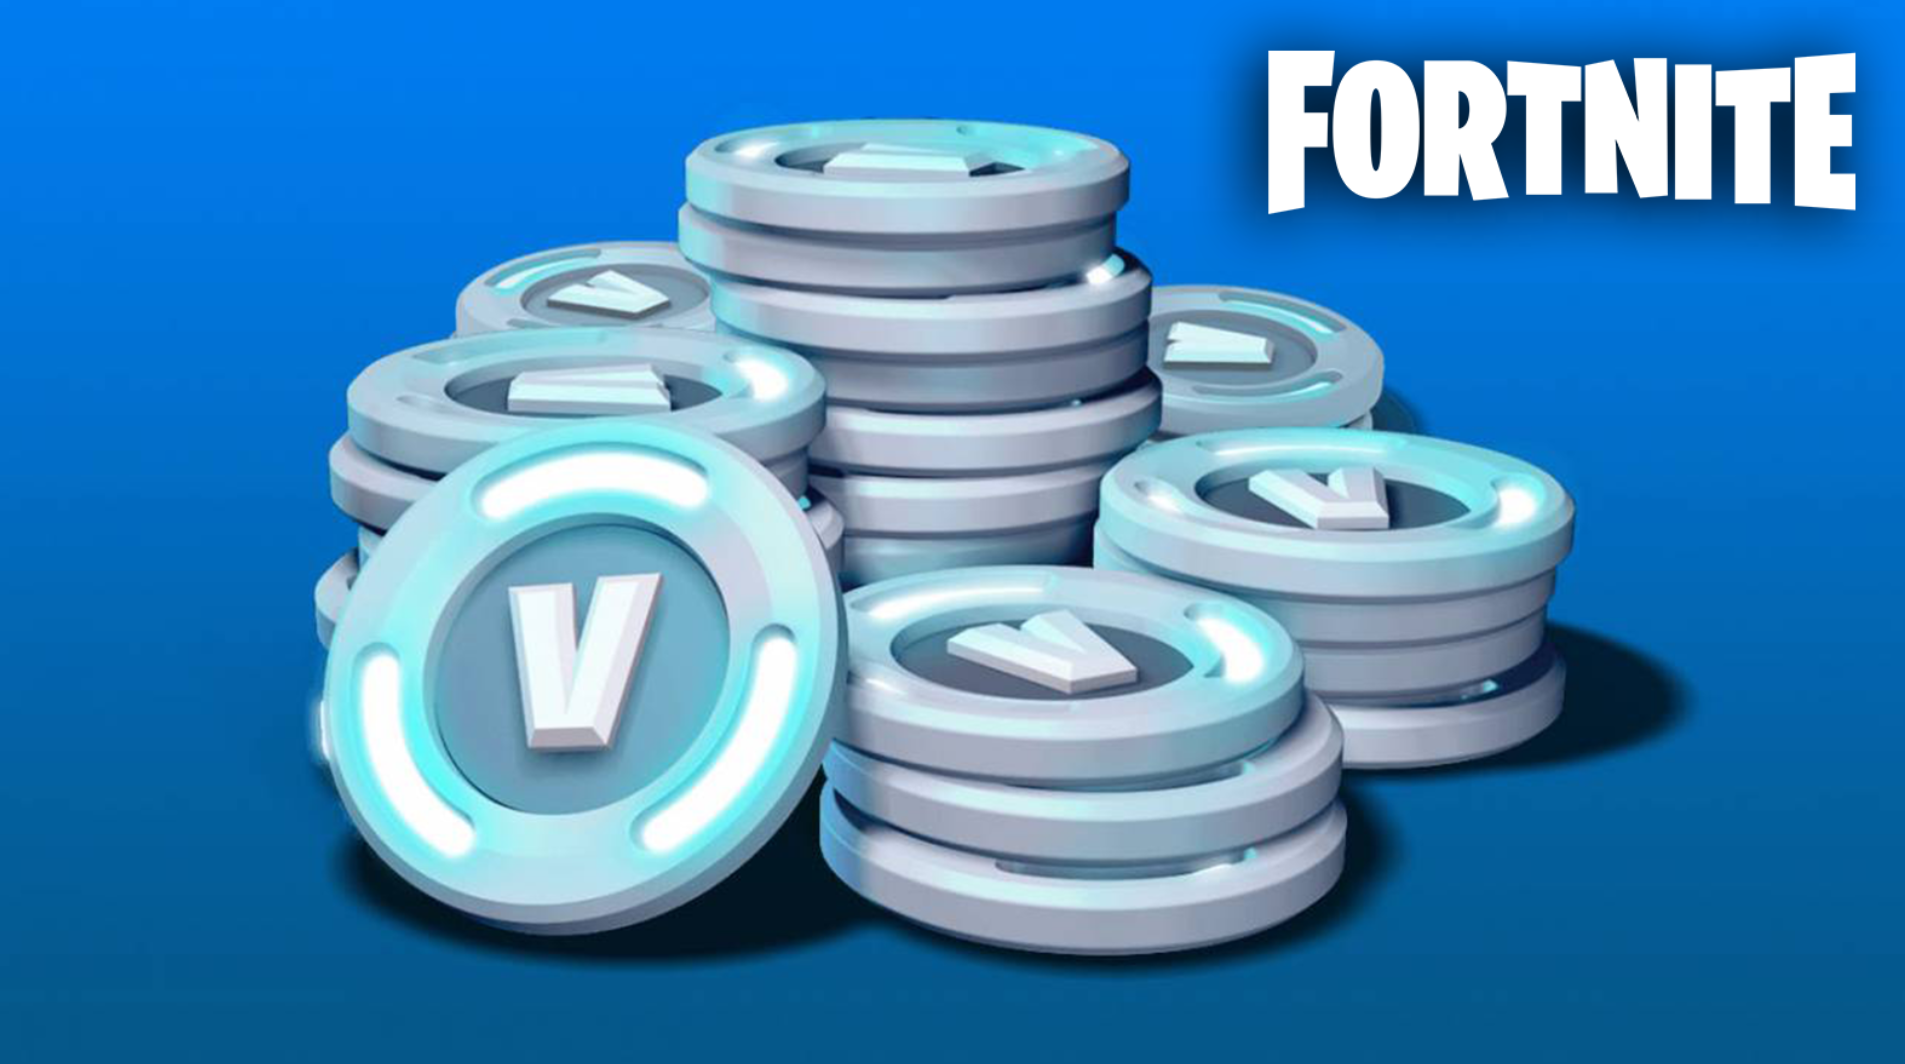 Epic Games giving out Fortnite V-Bucks in response to class-action